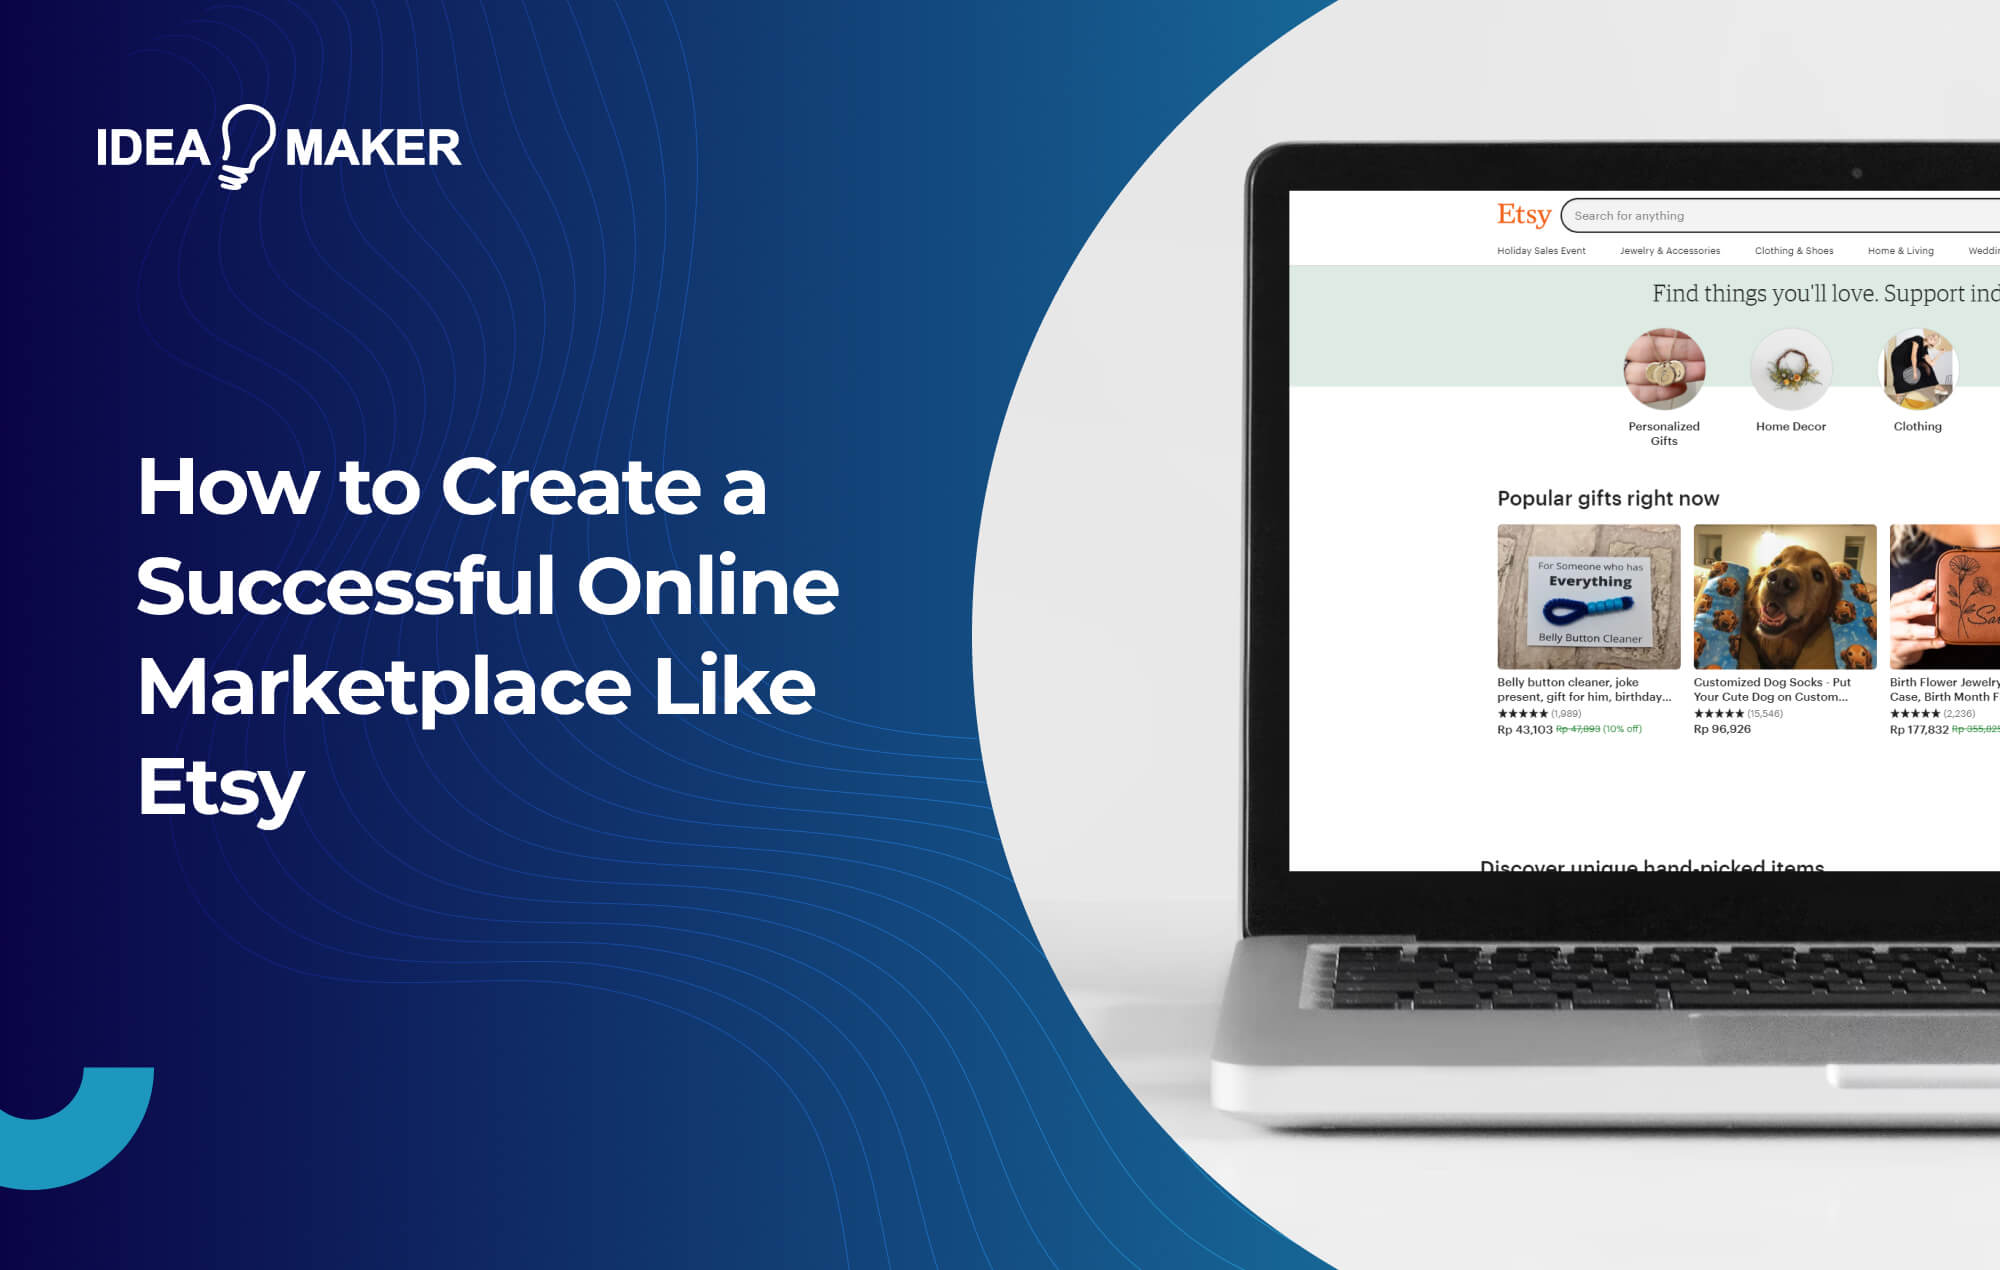 Ideamaker - How to Create a Successful Online Marketplace Like Etsy